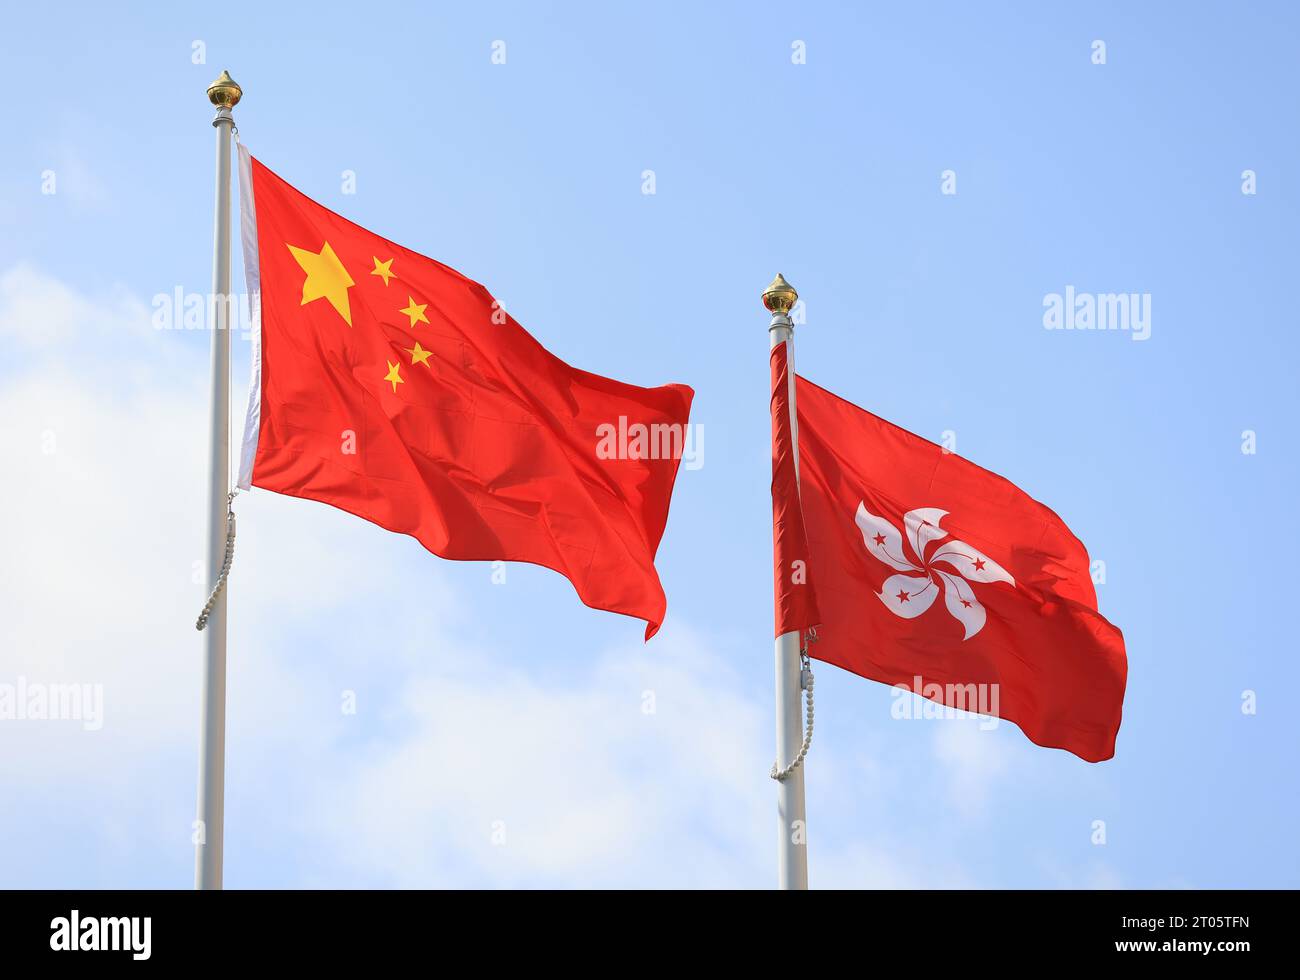 Chinese and hong kong flag set up in the event for celebrating the National Day of the People's Republic of China 74 th anniversary against the blue s Stock Photo